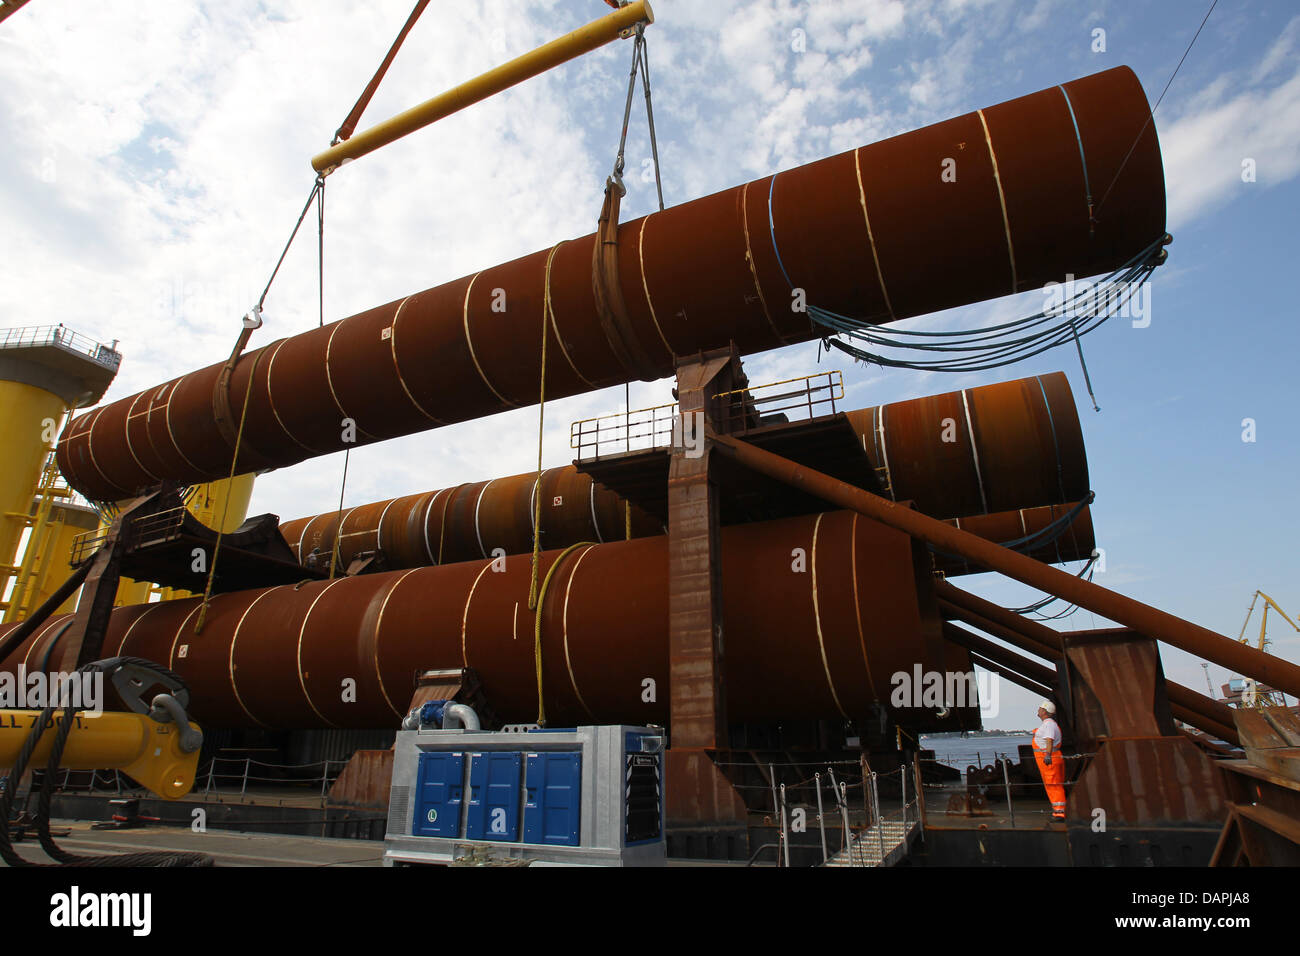 A 45 meter lon monopile with a weight of 260 tons and a diameter of 4.70 meters is loaded onto a barge for the offshore windfarm 'London Array' at the large-diameter pipe factory EEW Special Pipe Constructions at the sea port in Rostock, Germany, 23 August 2011. The Rostock company is delivering all 177 foundations for the world's largest windfarm on the coast of Great Britain. All Stock Photo